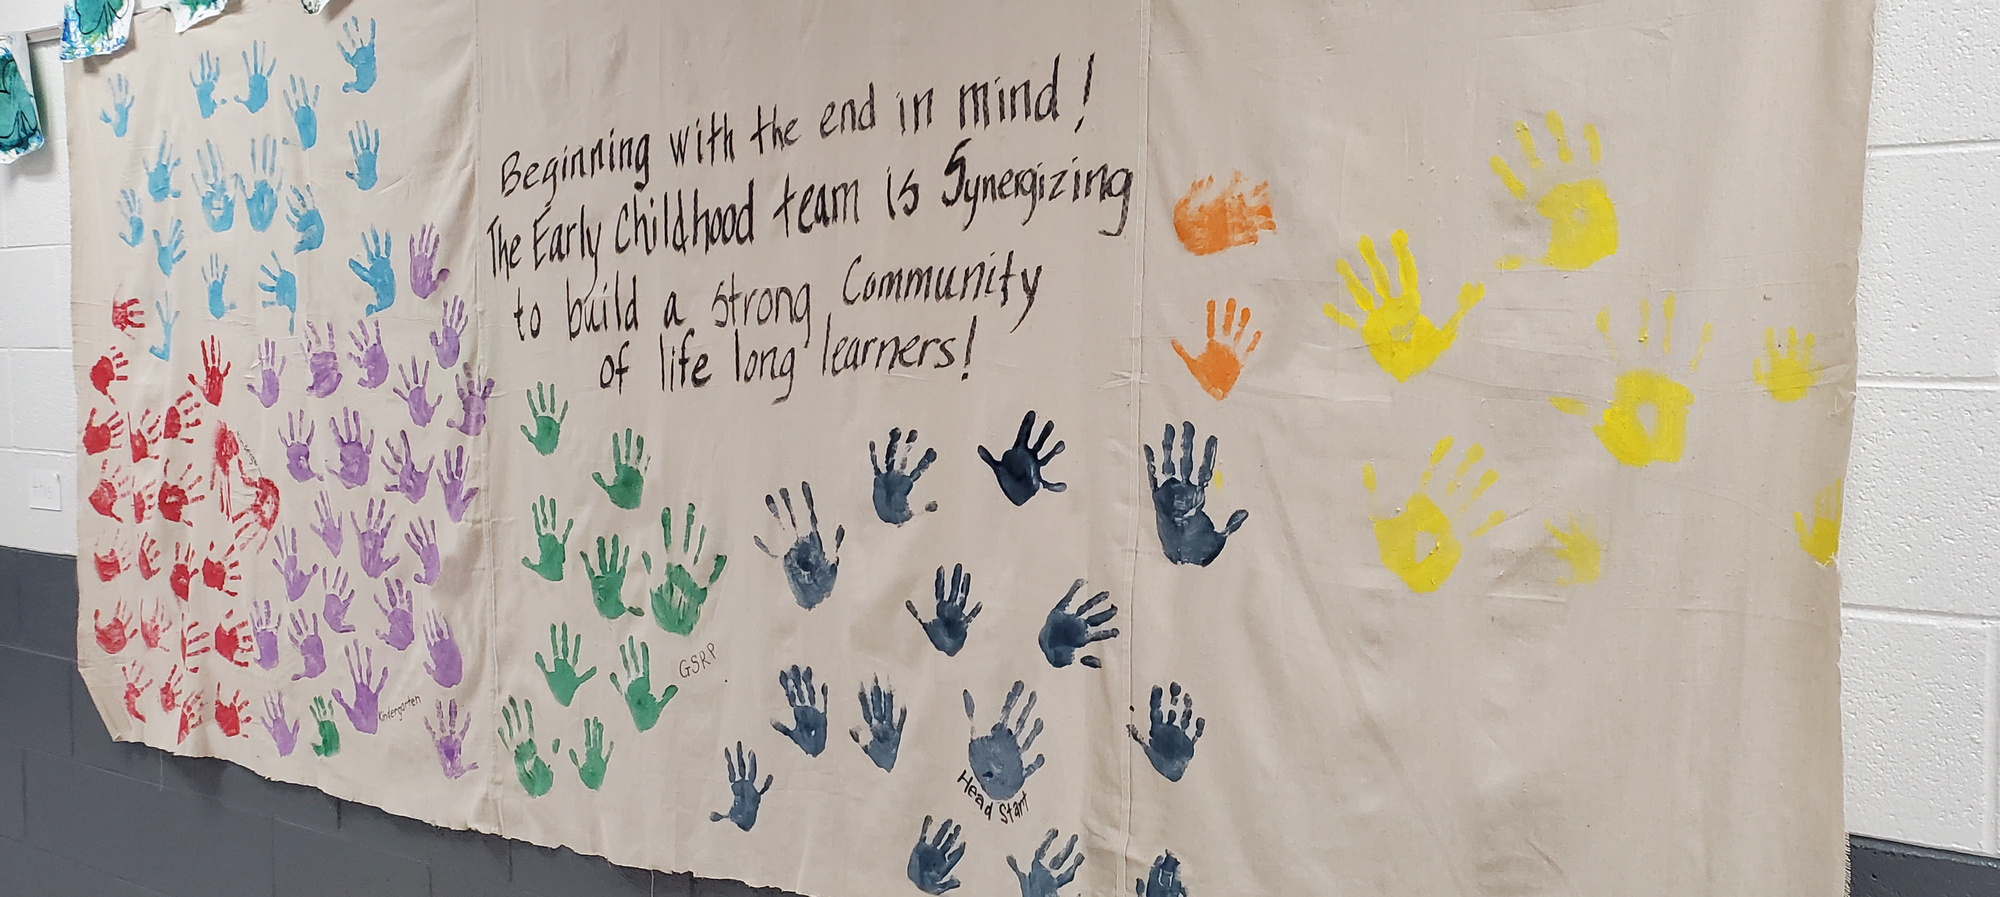 Banner with hand prints with message "Beginning with the end in mind! Early Childhood team is synergizing to build a strong community of life long learners!"